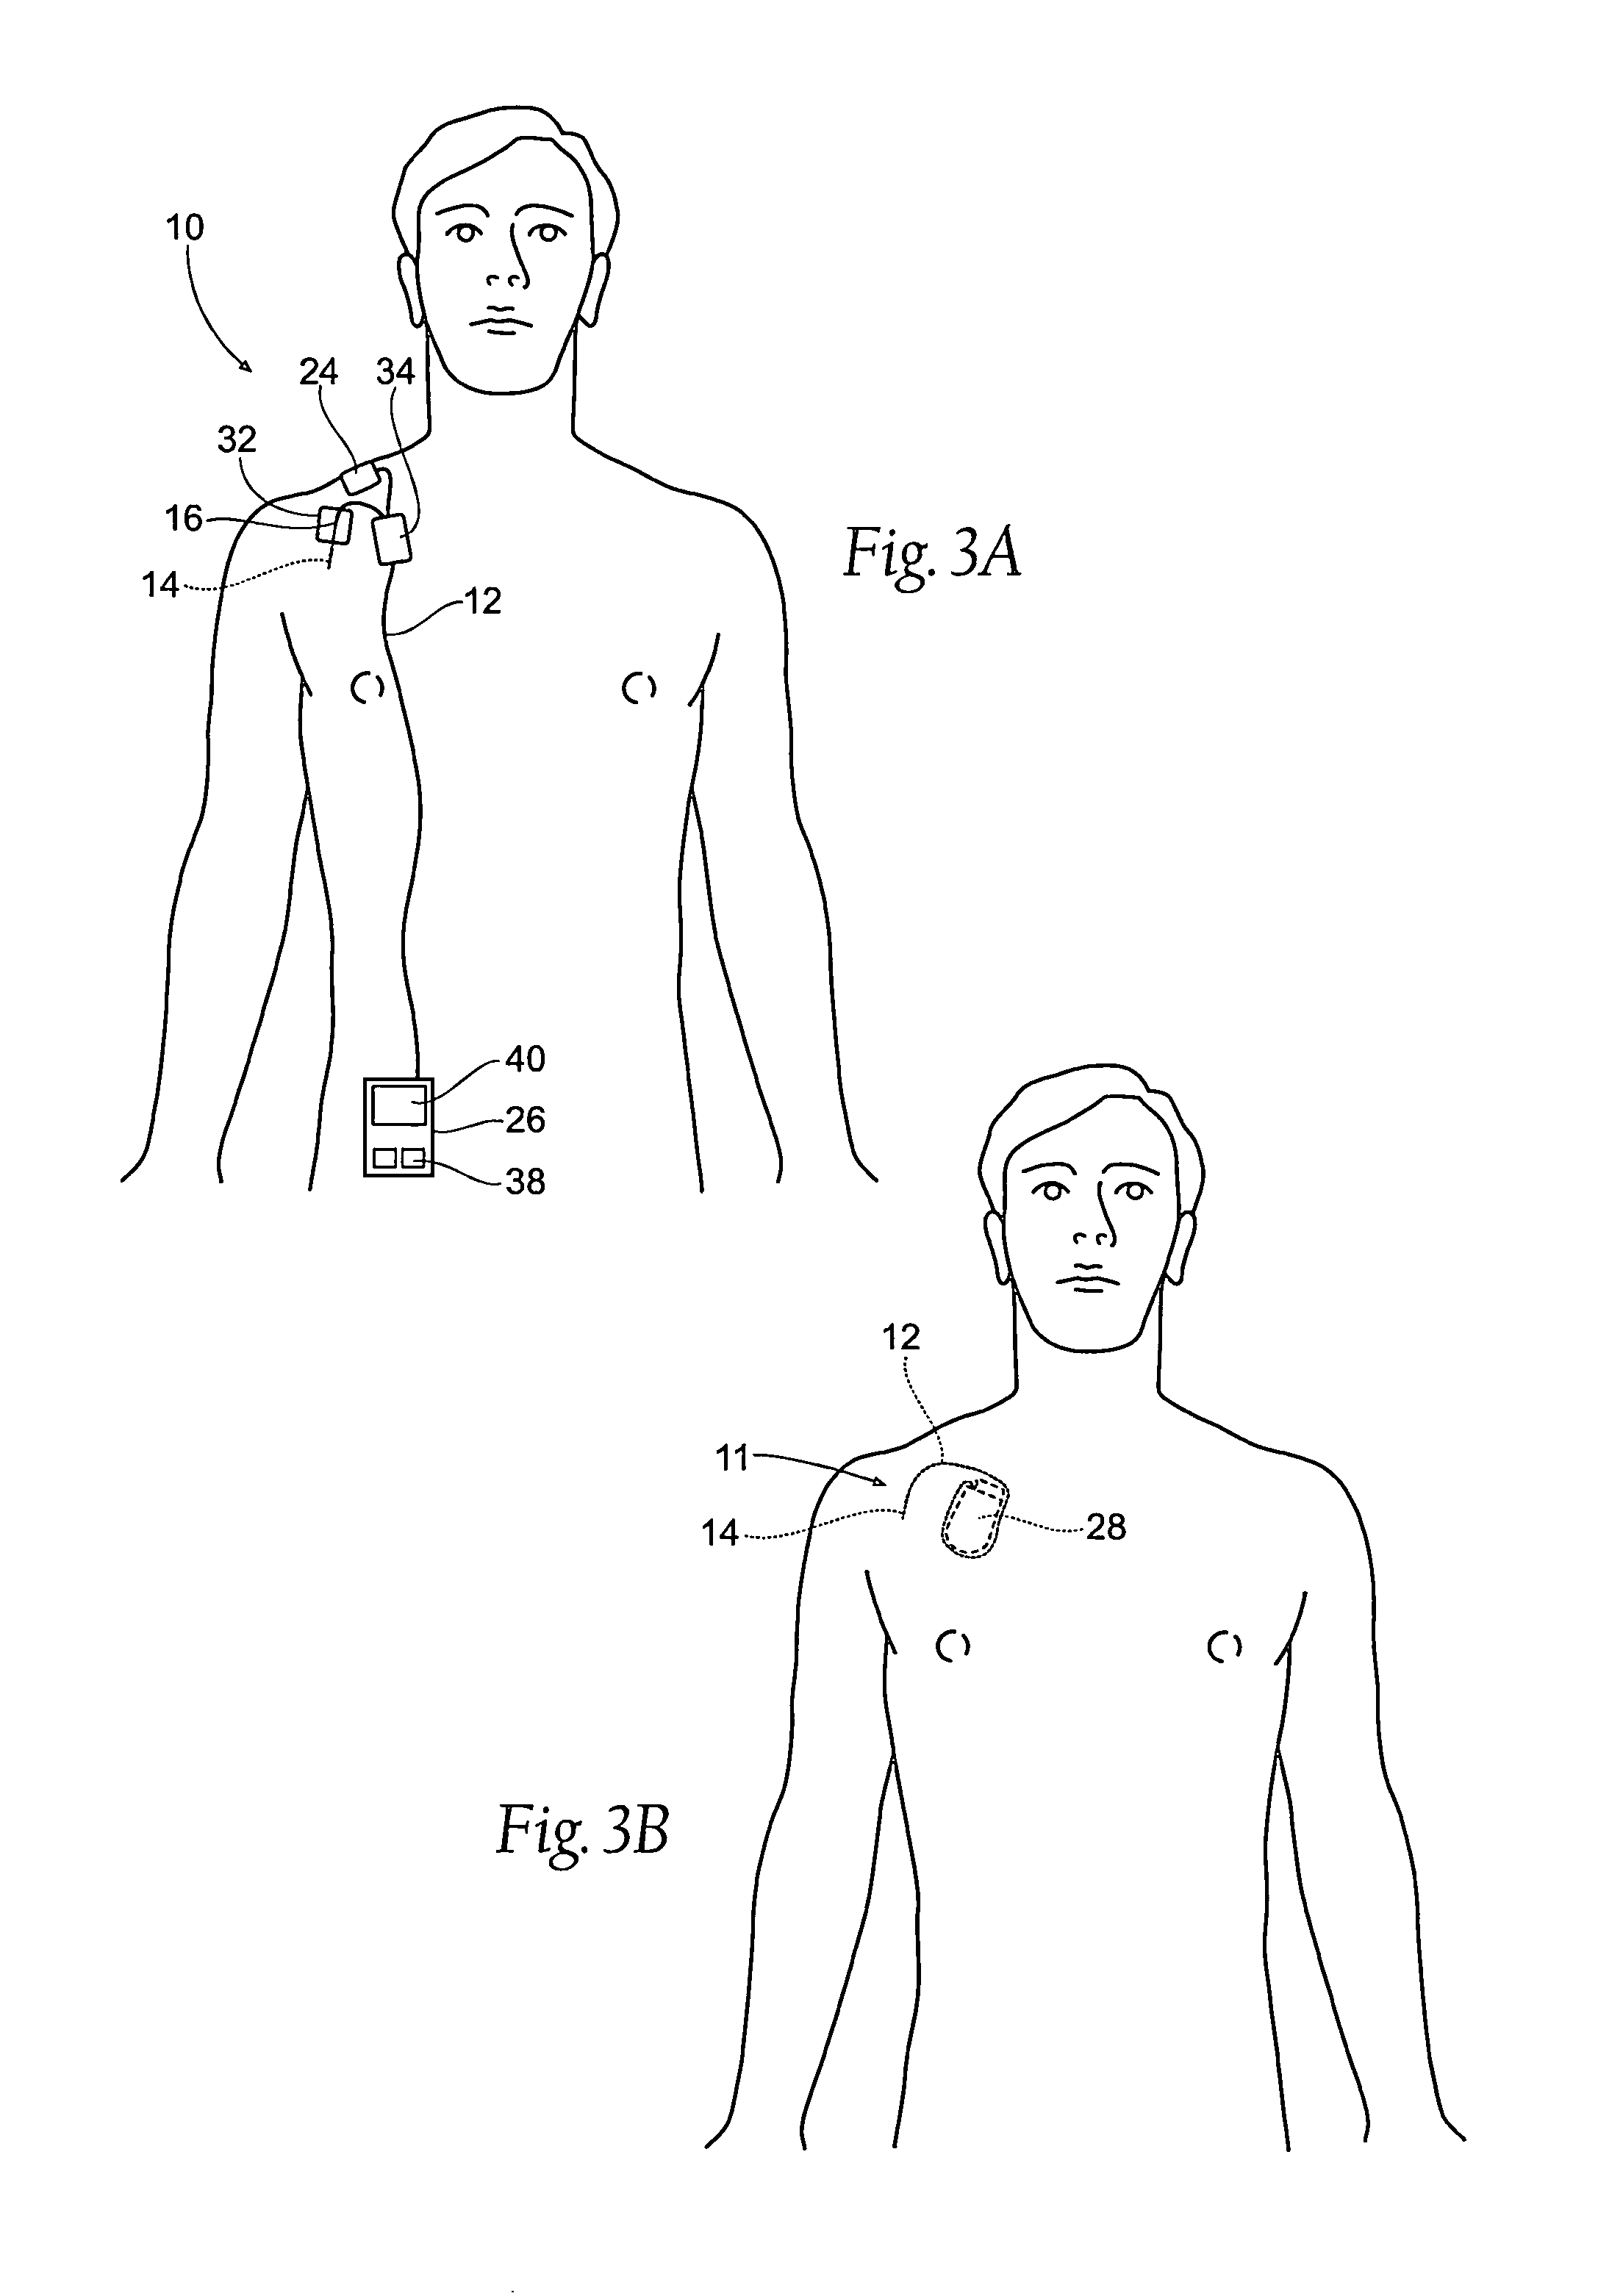 Systems and methods to place one or more leads in muscle for providing electrical stimulation to treat pain